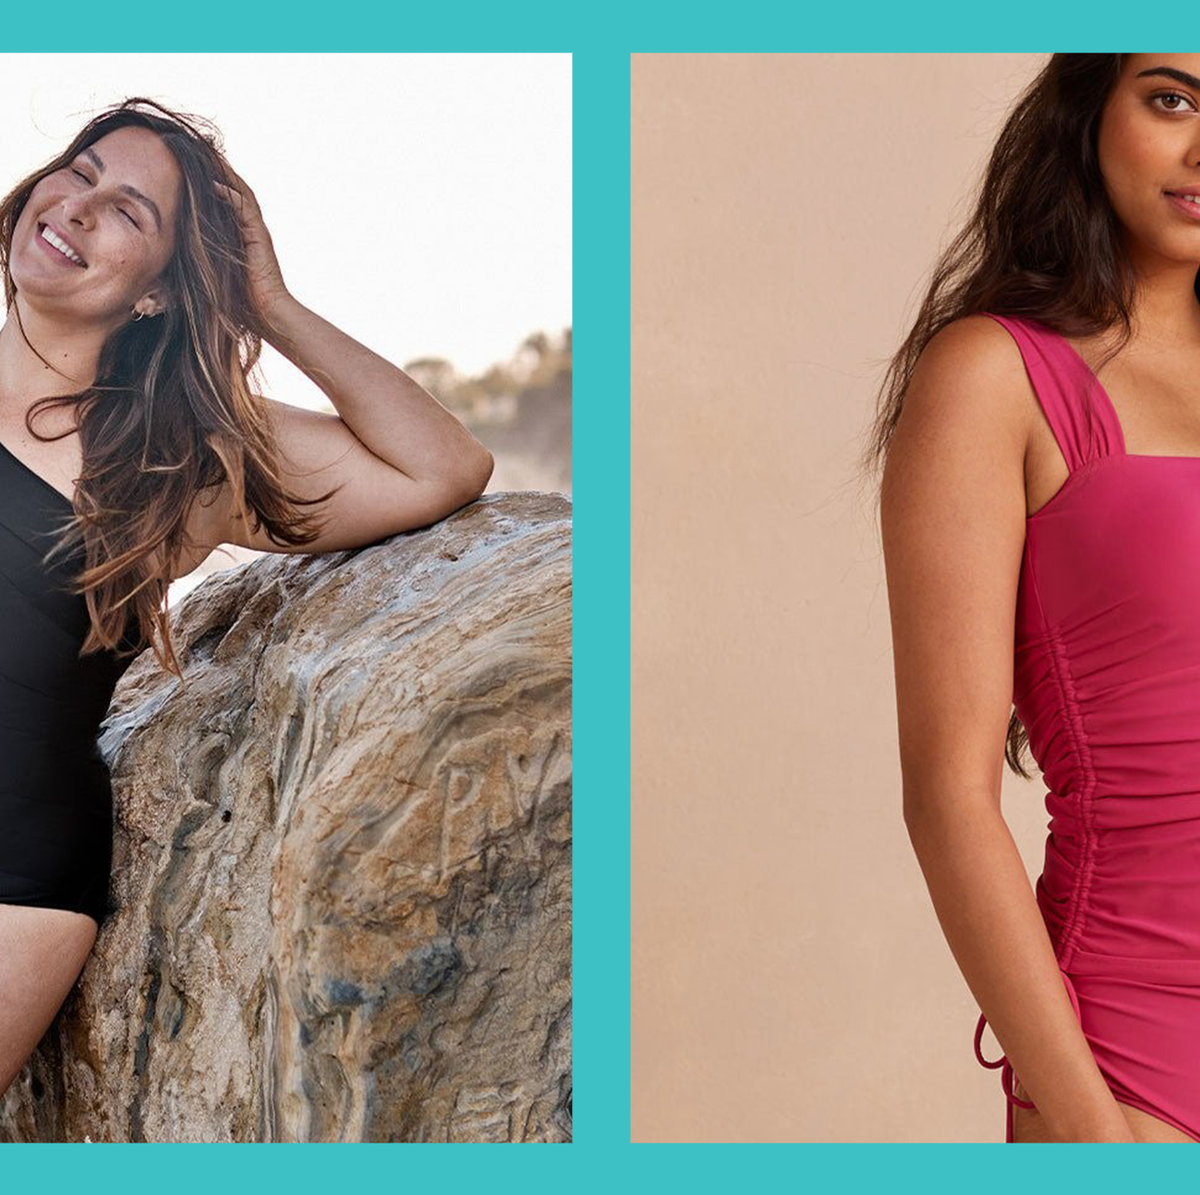 8 Sleek Swimsuit And Shorts Combos To Try This Summer